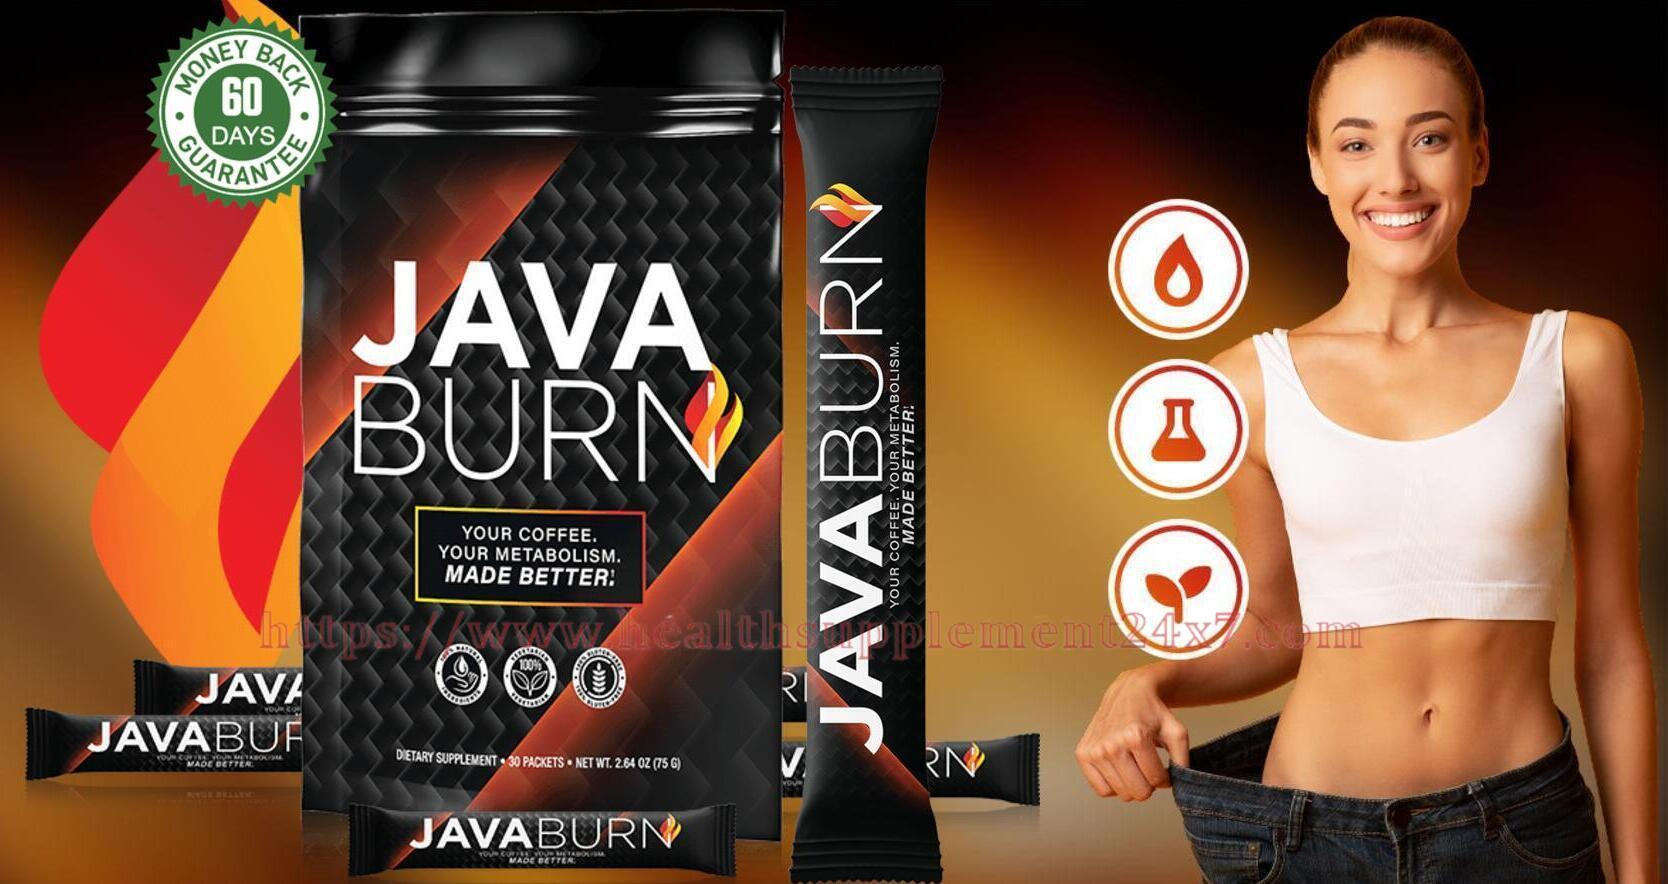 Java Burn 【EXCLUSIVE PRICE】 Help To Increase Efficiency of Metabolism And Fat Loss